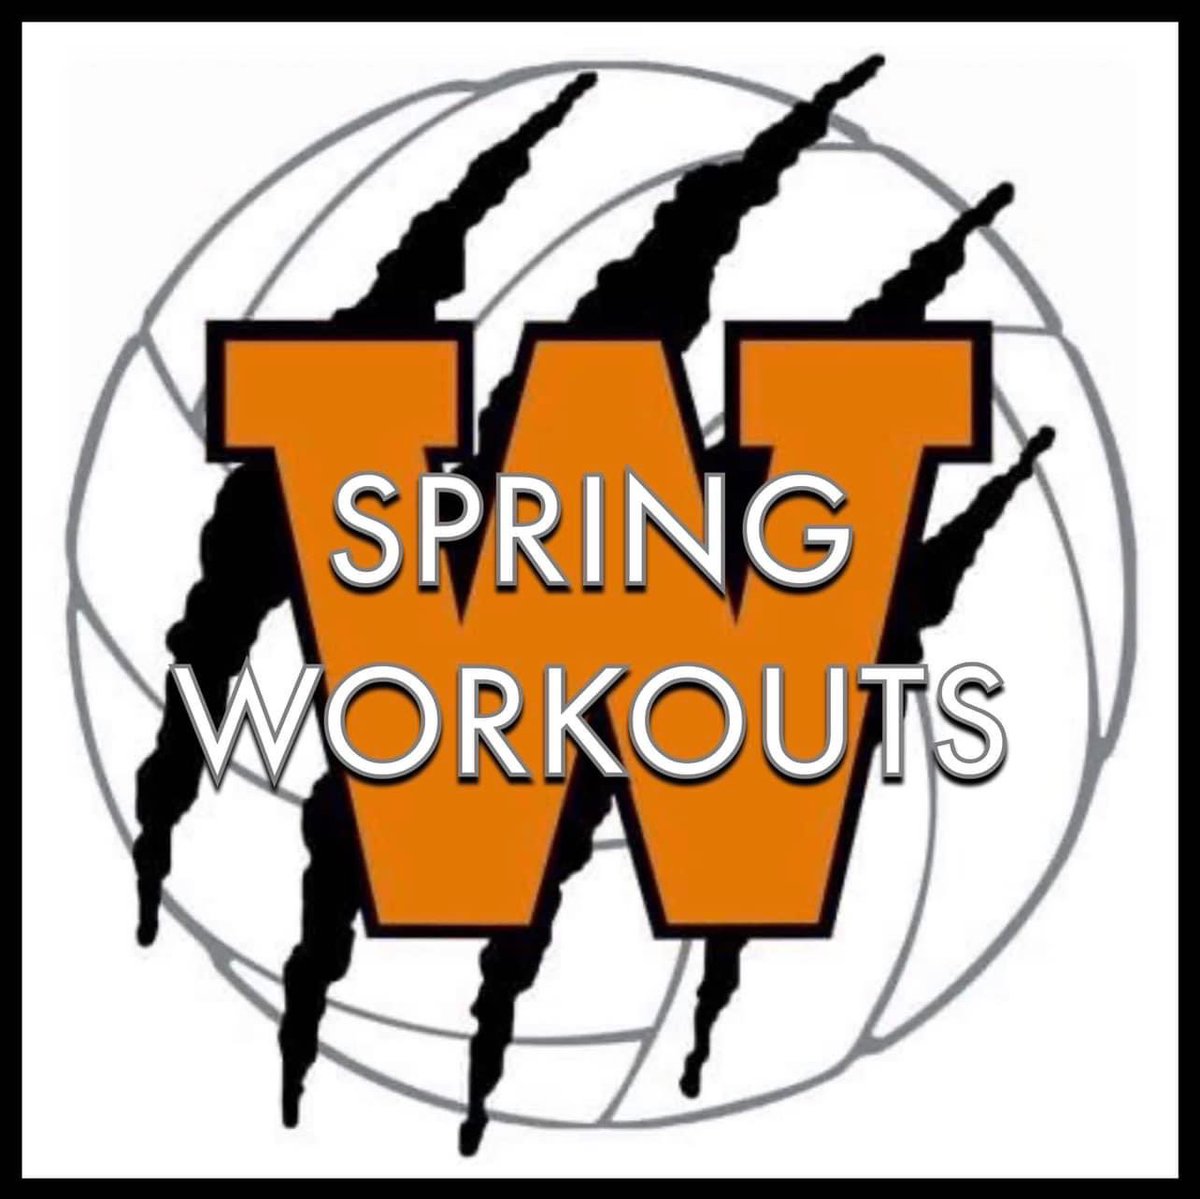 REMINDER- 

Spring Workouts TONIGHT (Monday, 4/22) from 6-8 pm in the Tiger Den.  Please arrive at 5:30 pm through Door 22 for set up.

Go Tigers! 🧡🖤 #TigerFamily #WeAreWarsaw #OnTheProwl